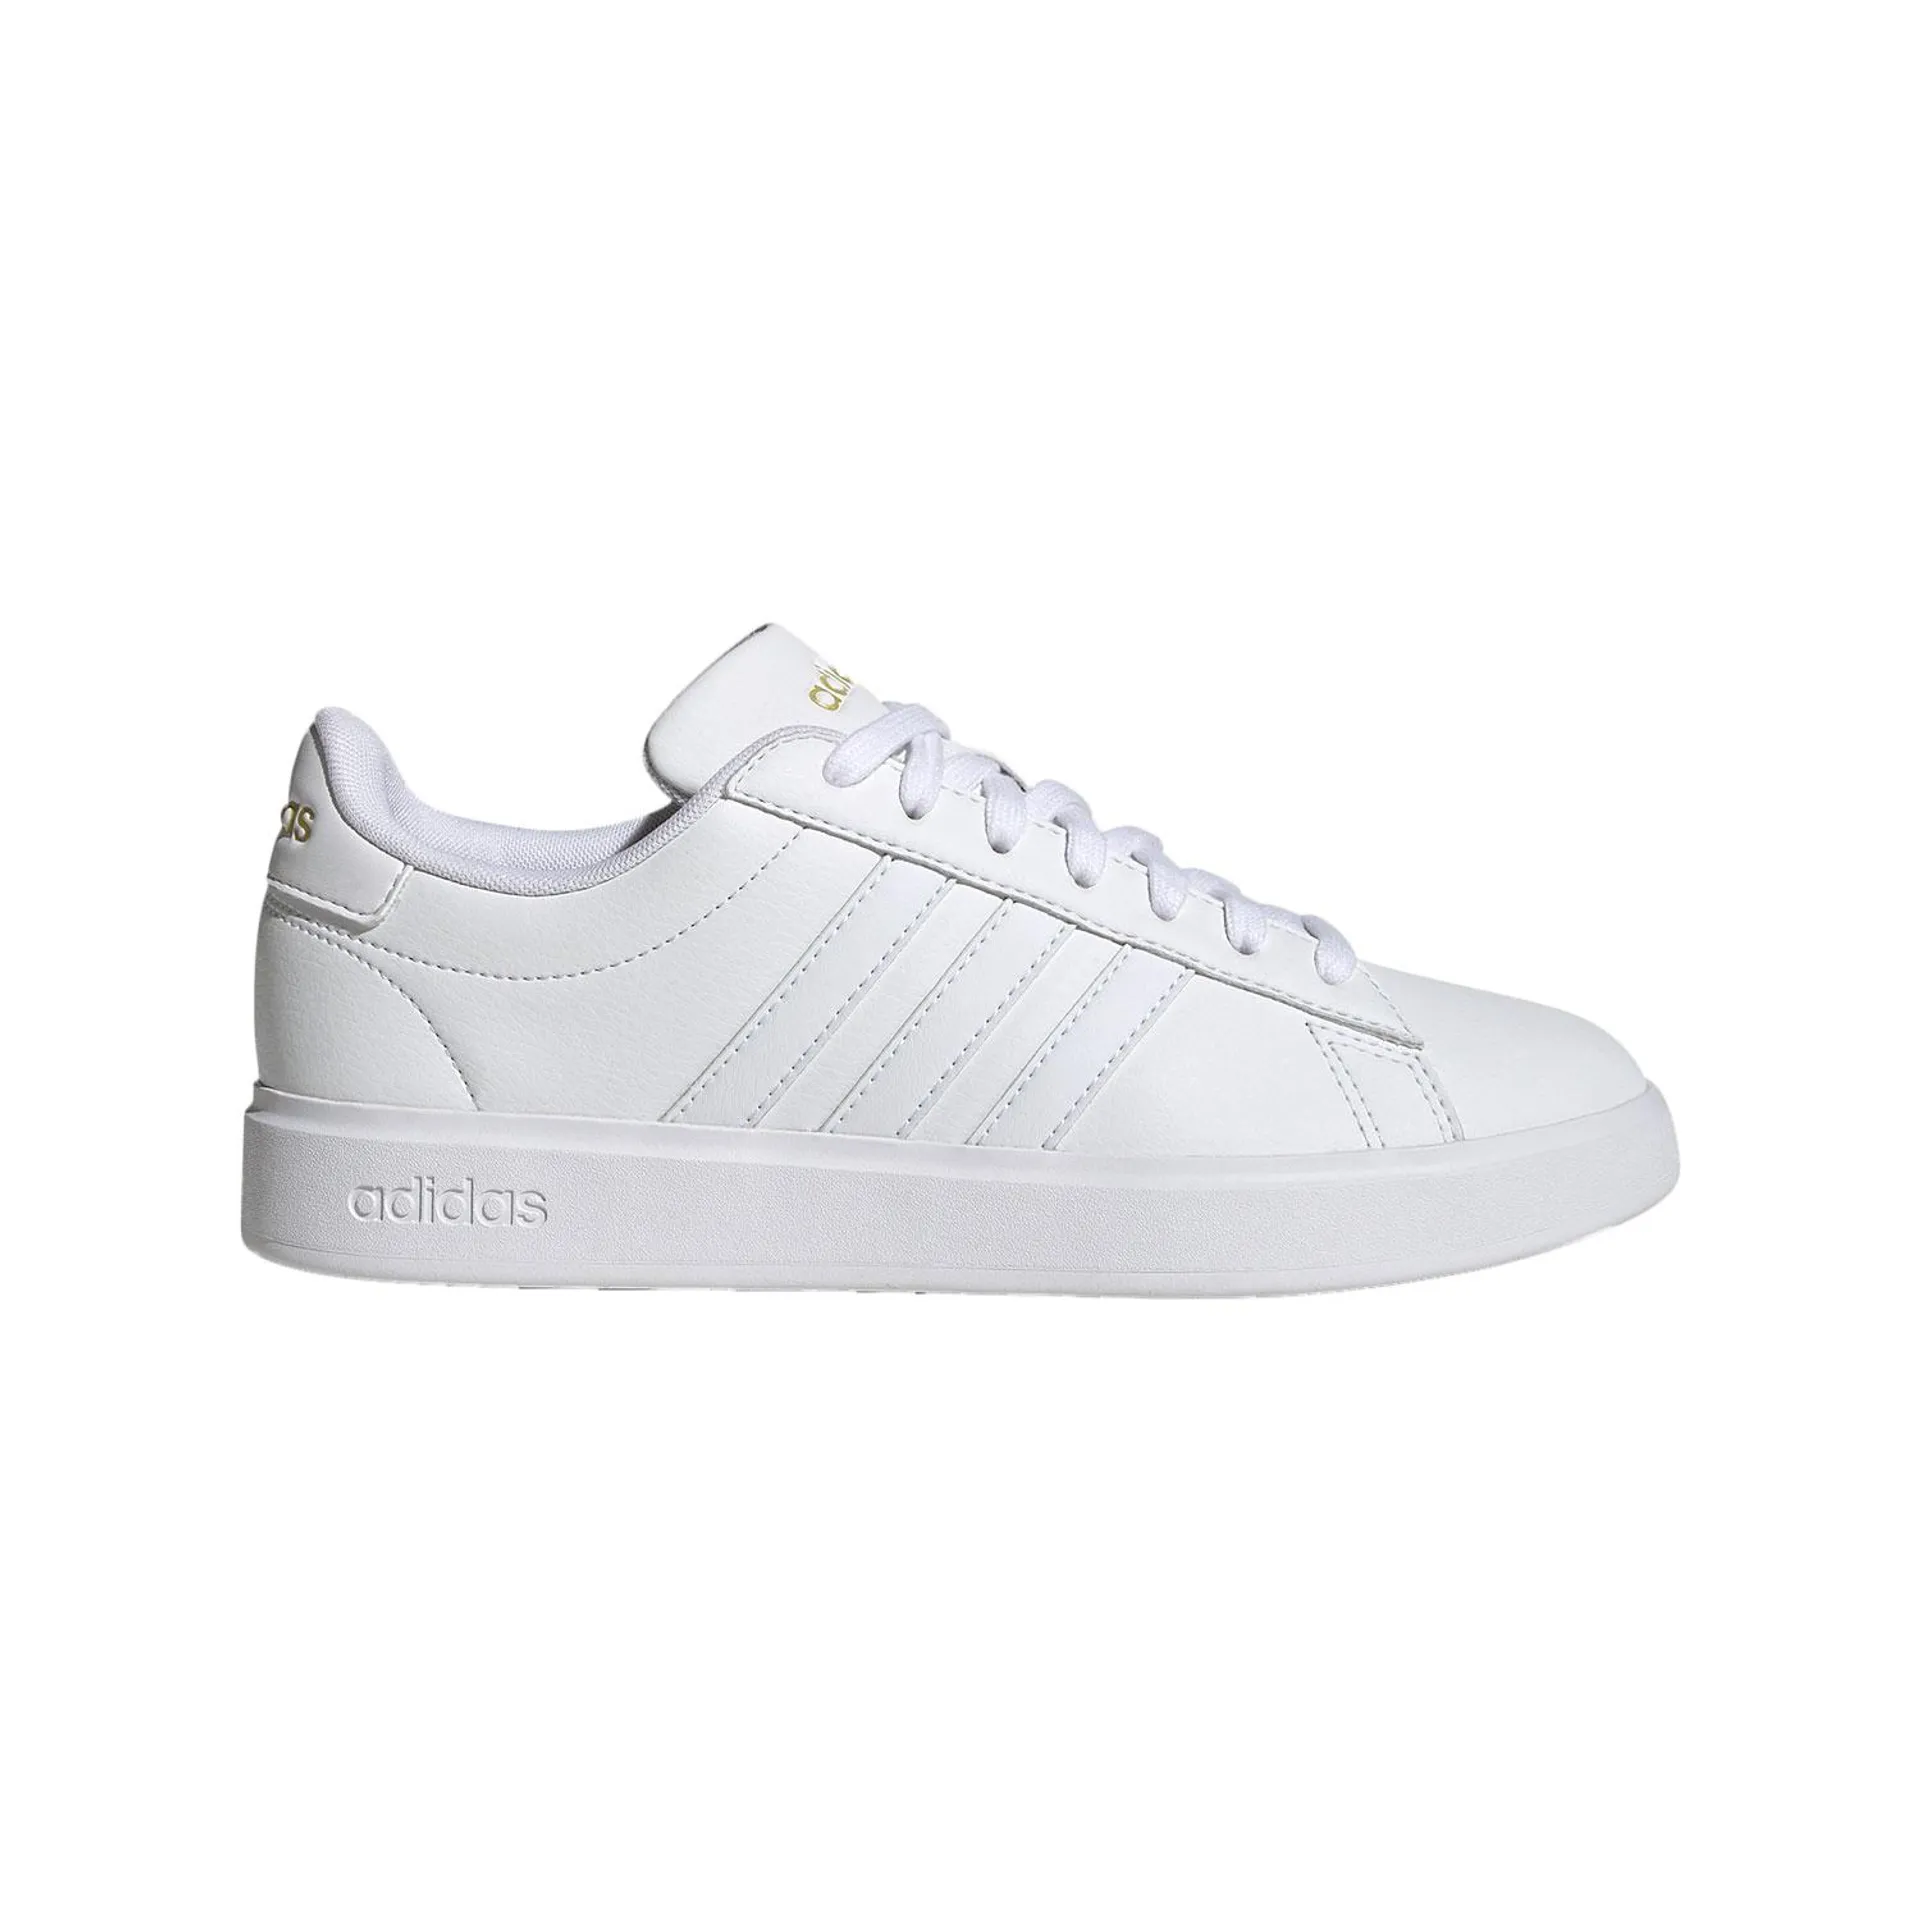 adidas Grand Court 2.0 Women's Lifestyle Shoes